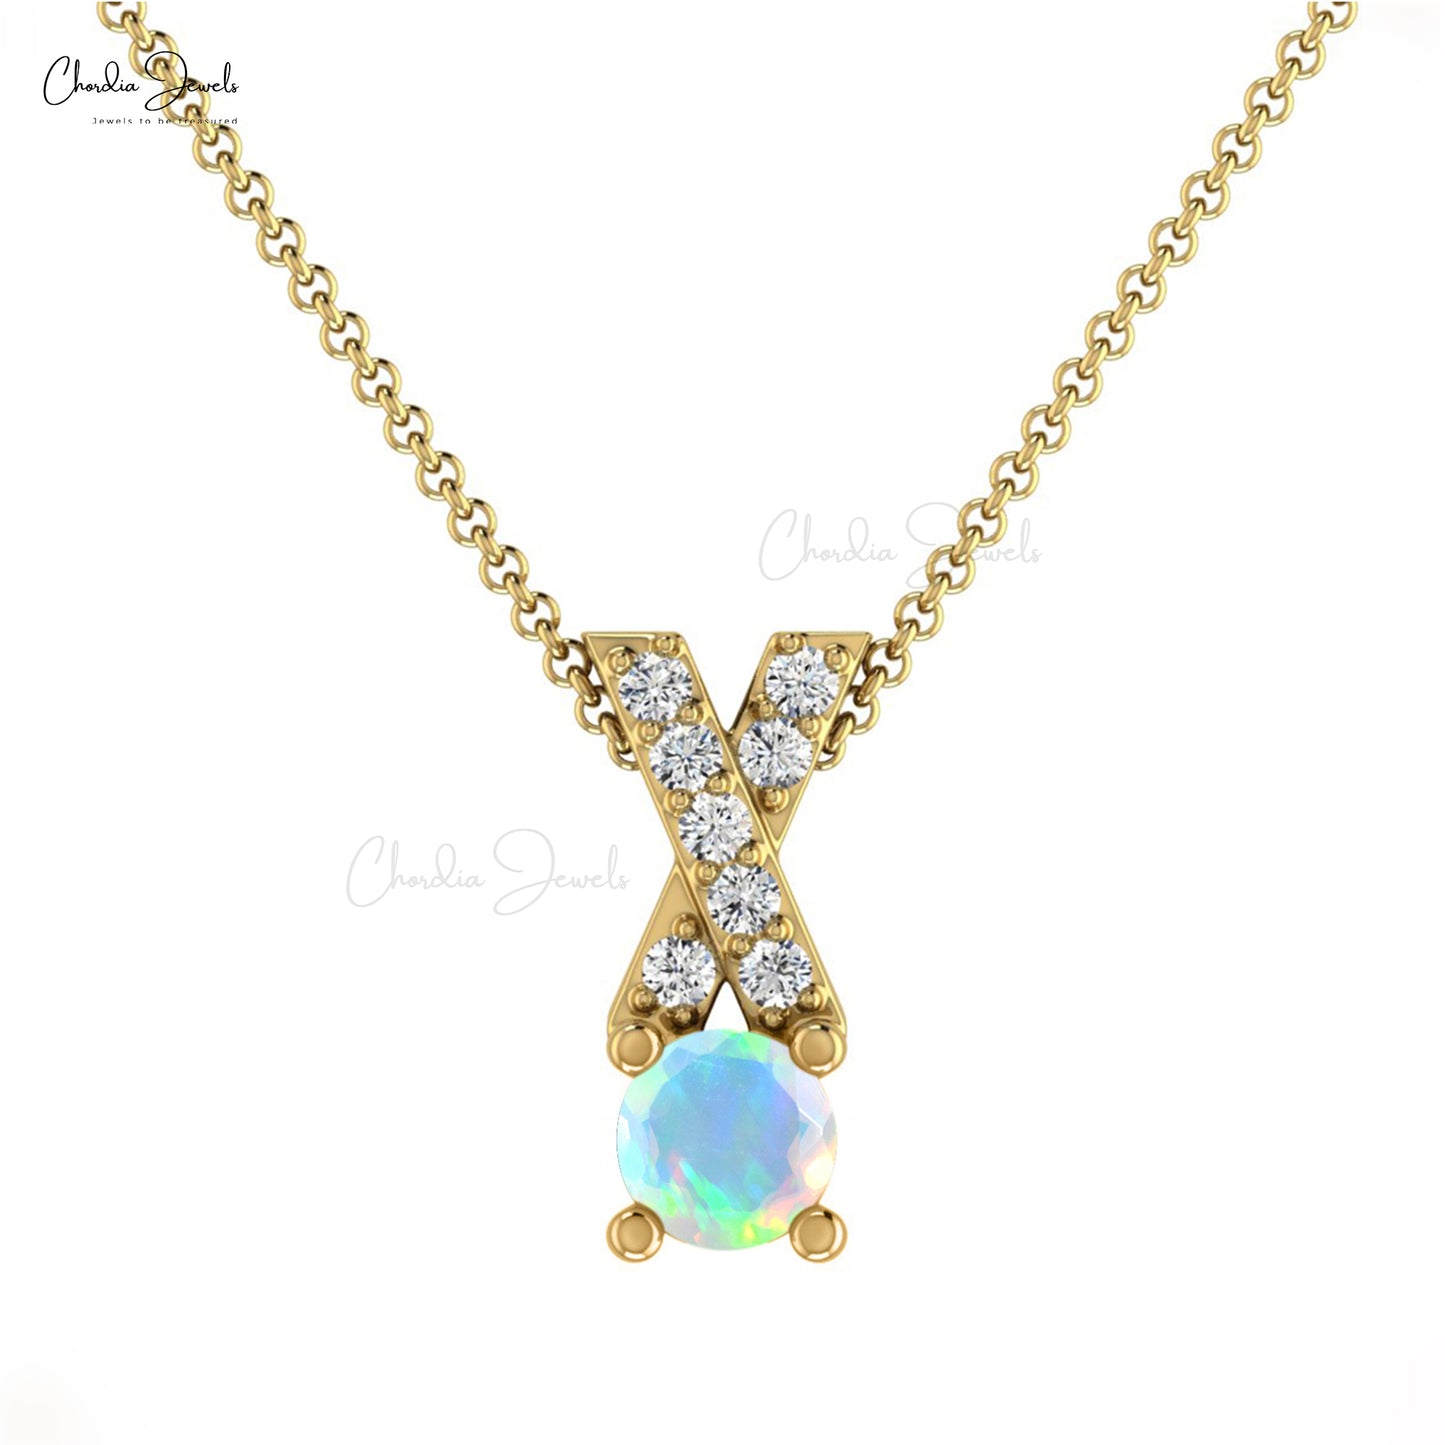 Load image into Gallery viewer, Natural Ethiopian Opal Criss Cross Pendant 14k Solid Gold Diamond Pendant 0.37 Carat Round Cut Handmade Gemstone Pendant For Birthday Gift
